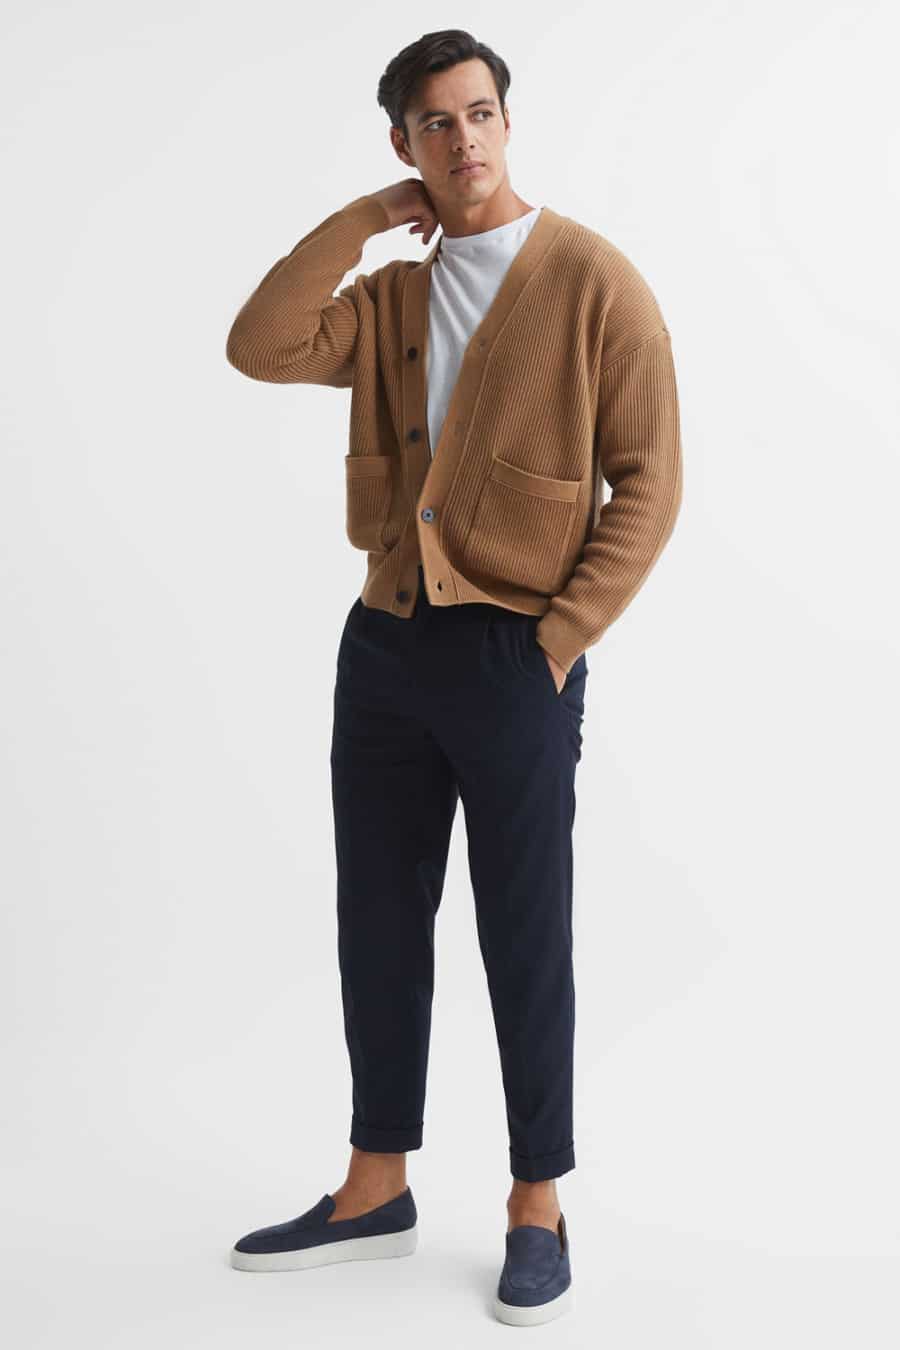 Men's navy chinos, white T-shirt, slouchy tan cardigan and suede loafers outfit